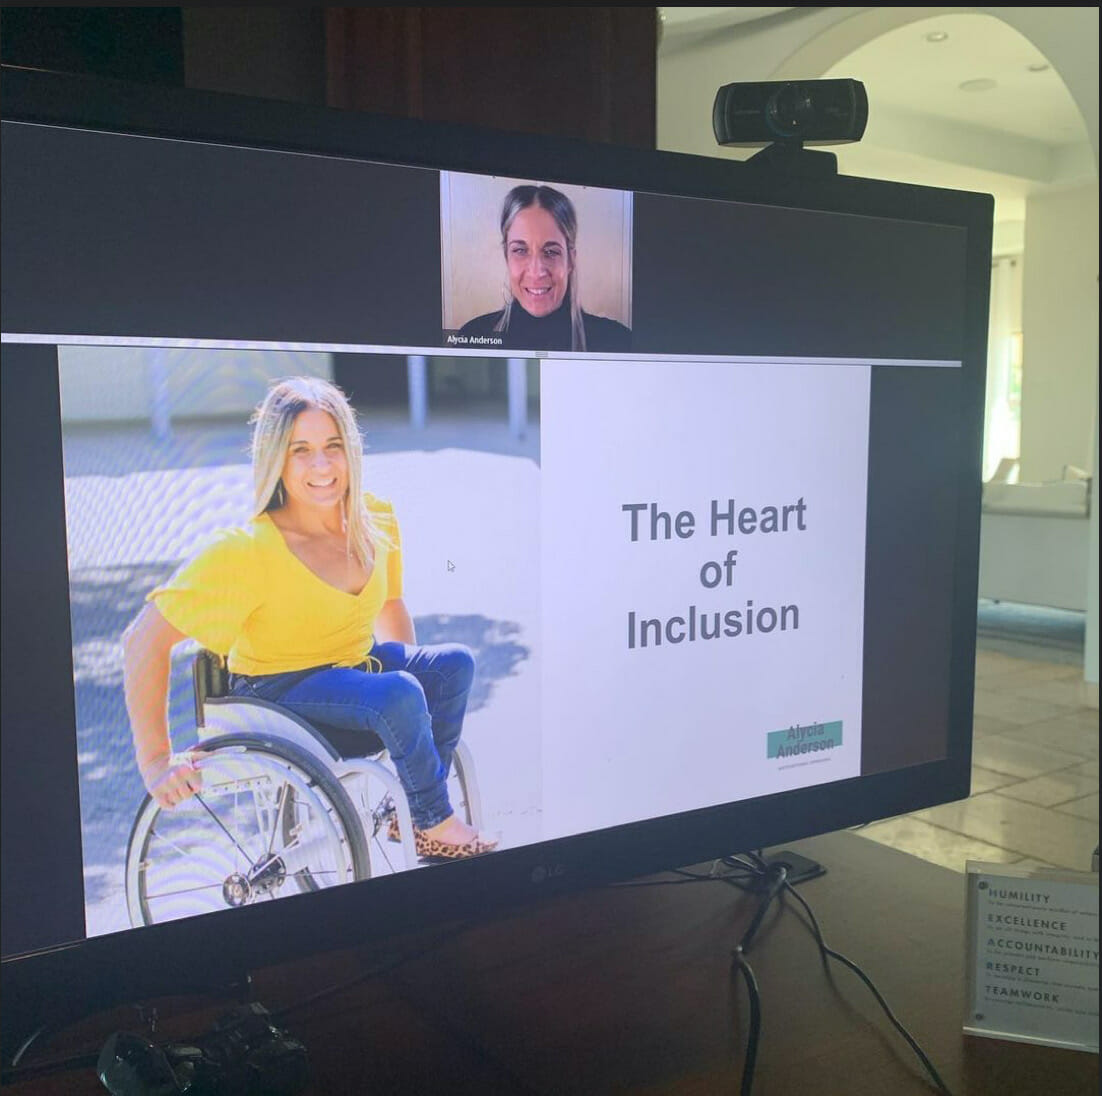 alycia on monitor with slide the heart of inclusion